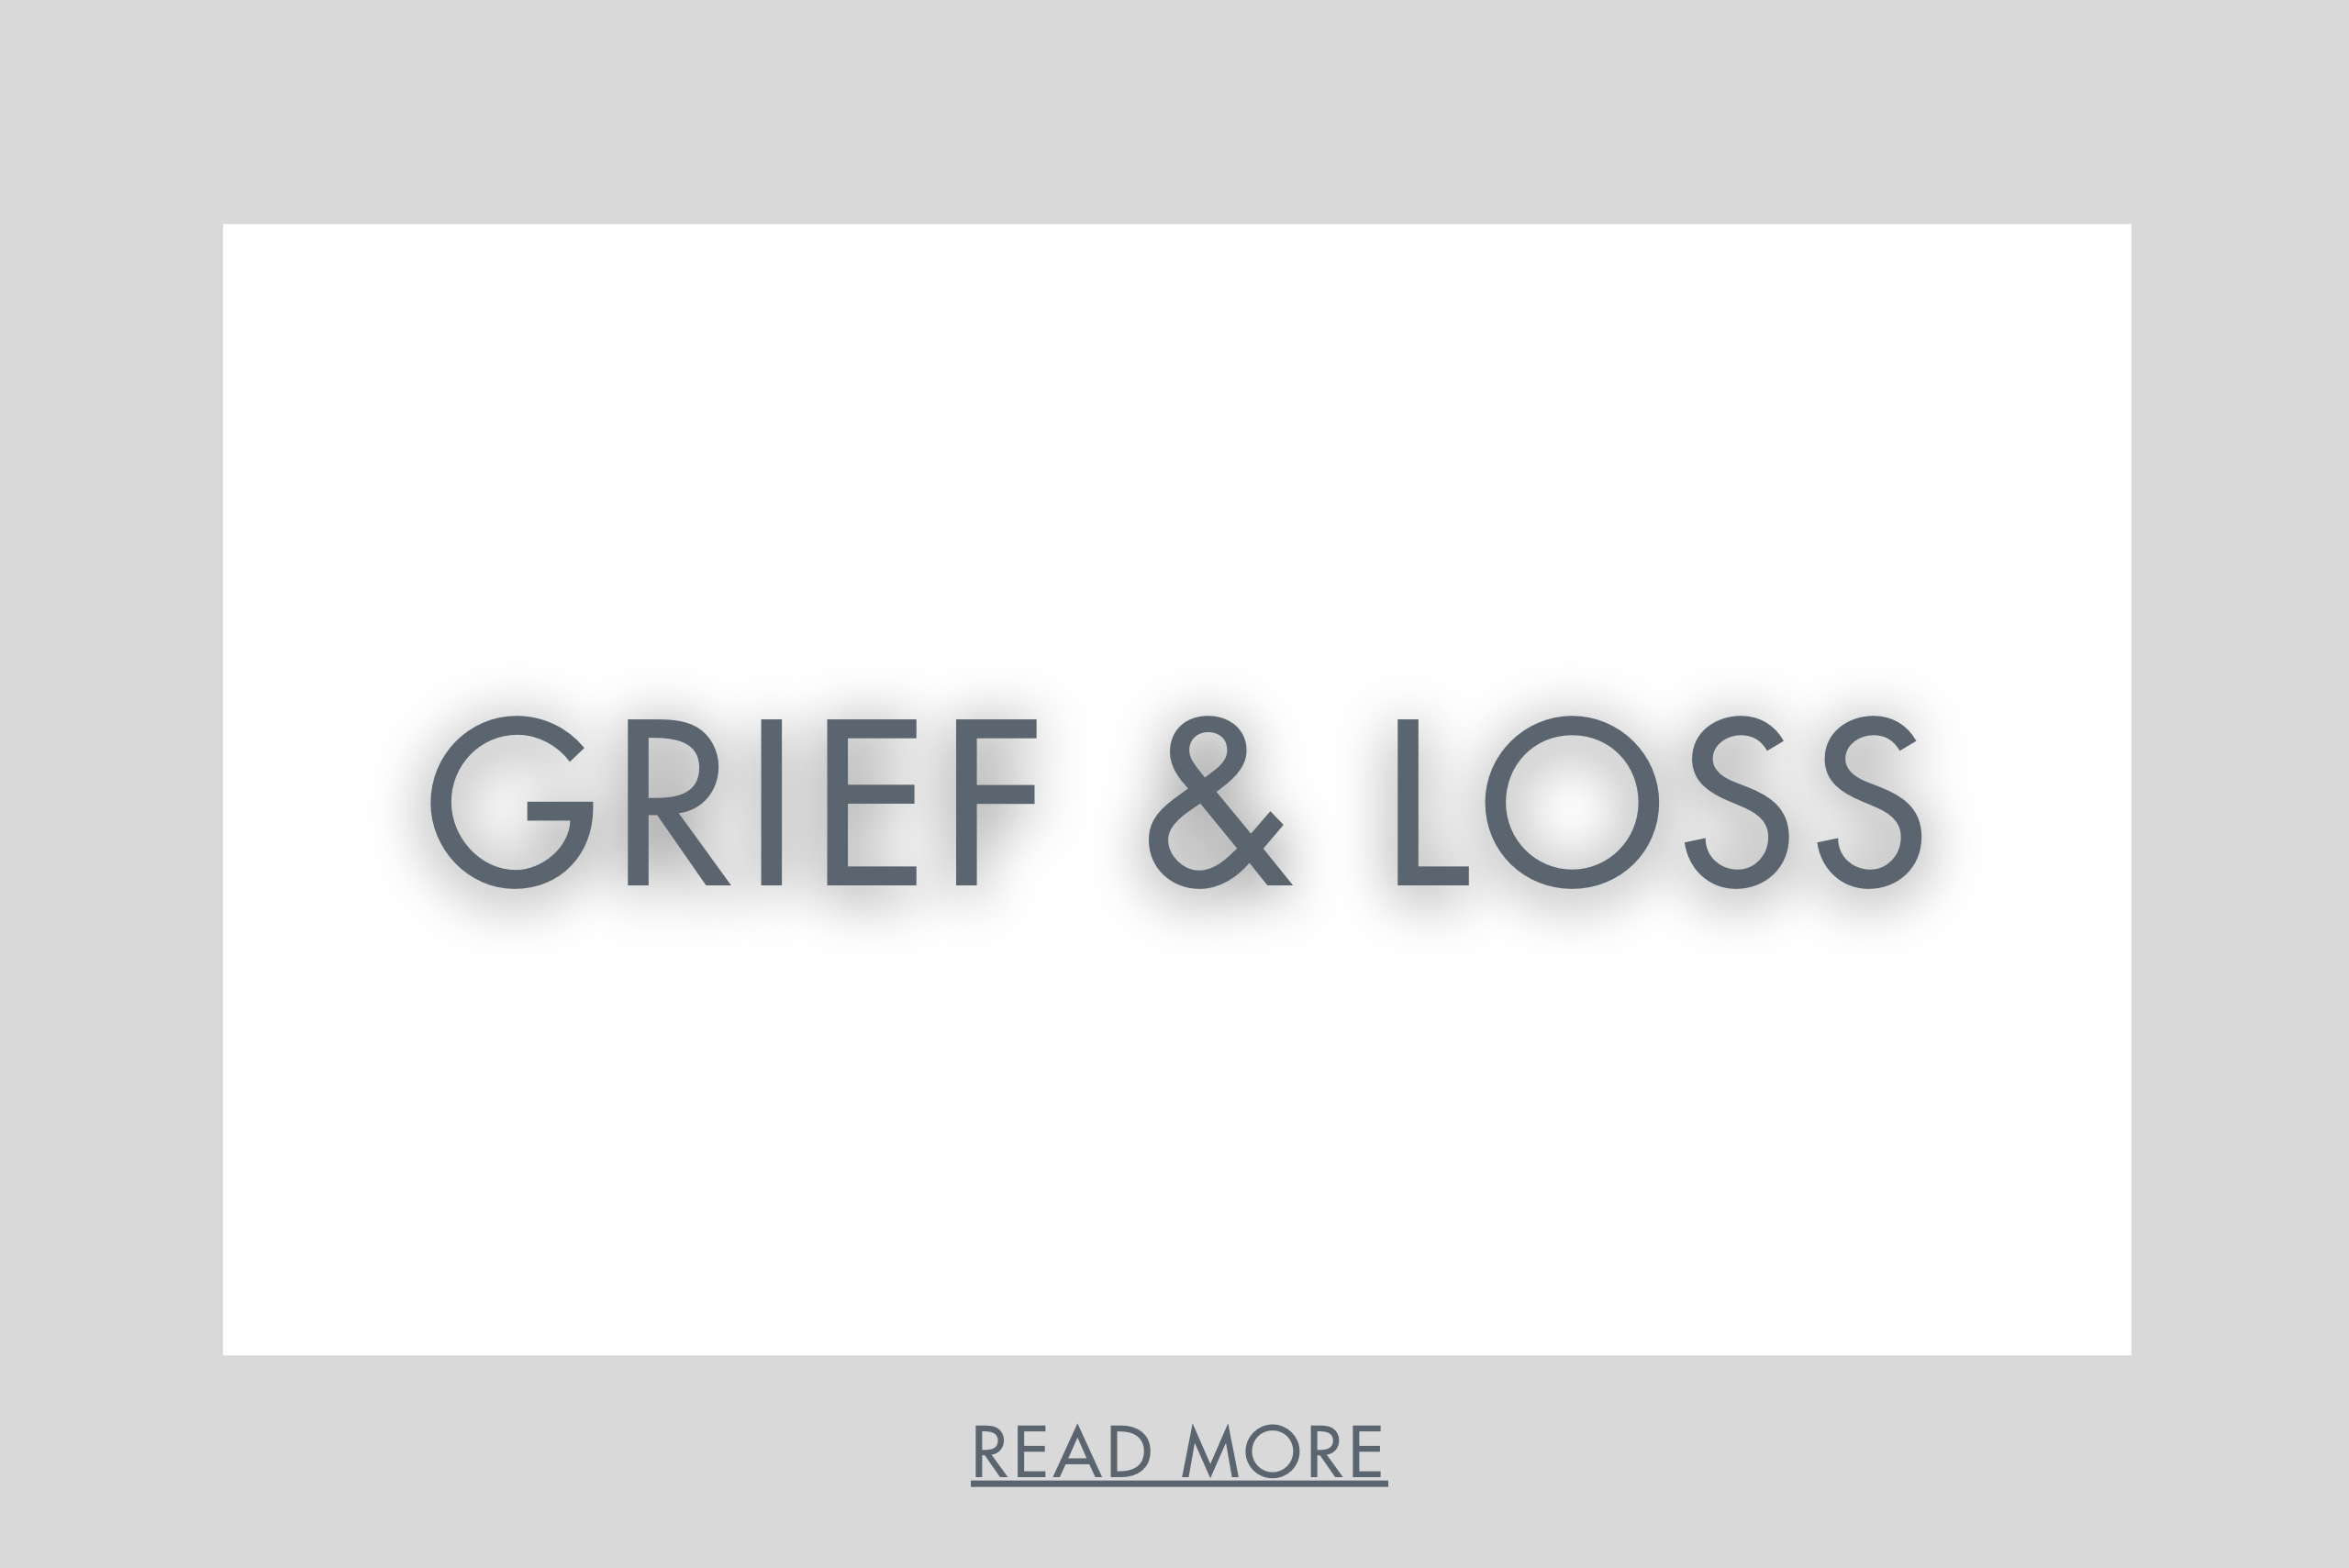 grief and loss